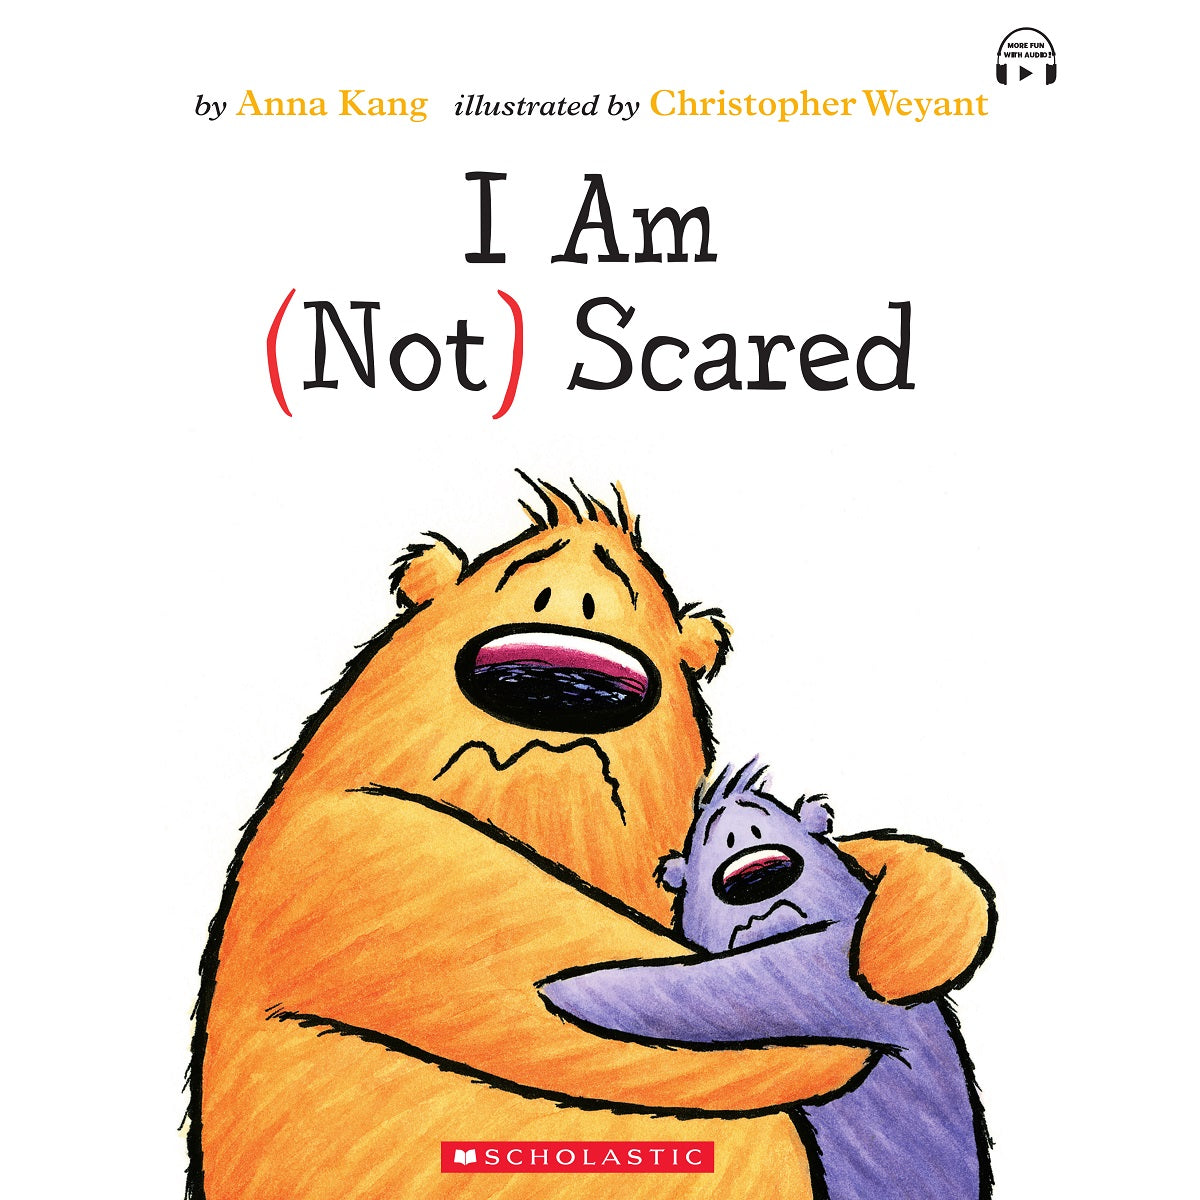 I Am (Not) Scared